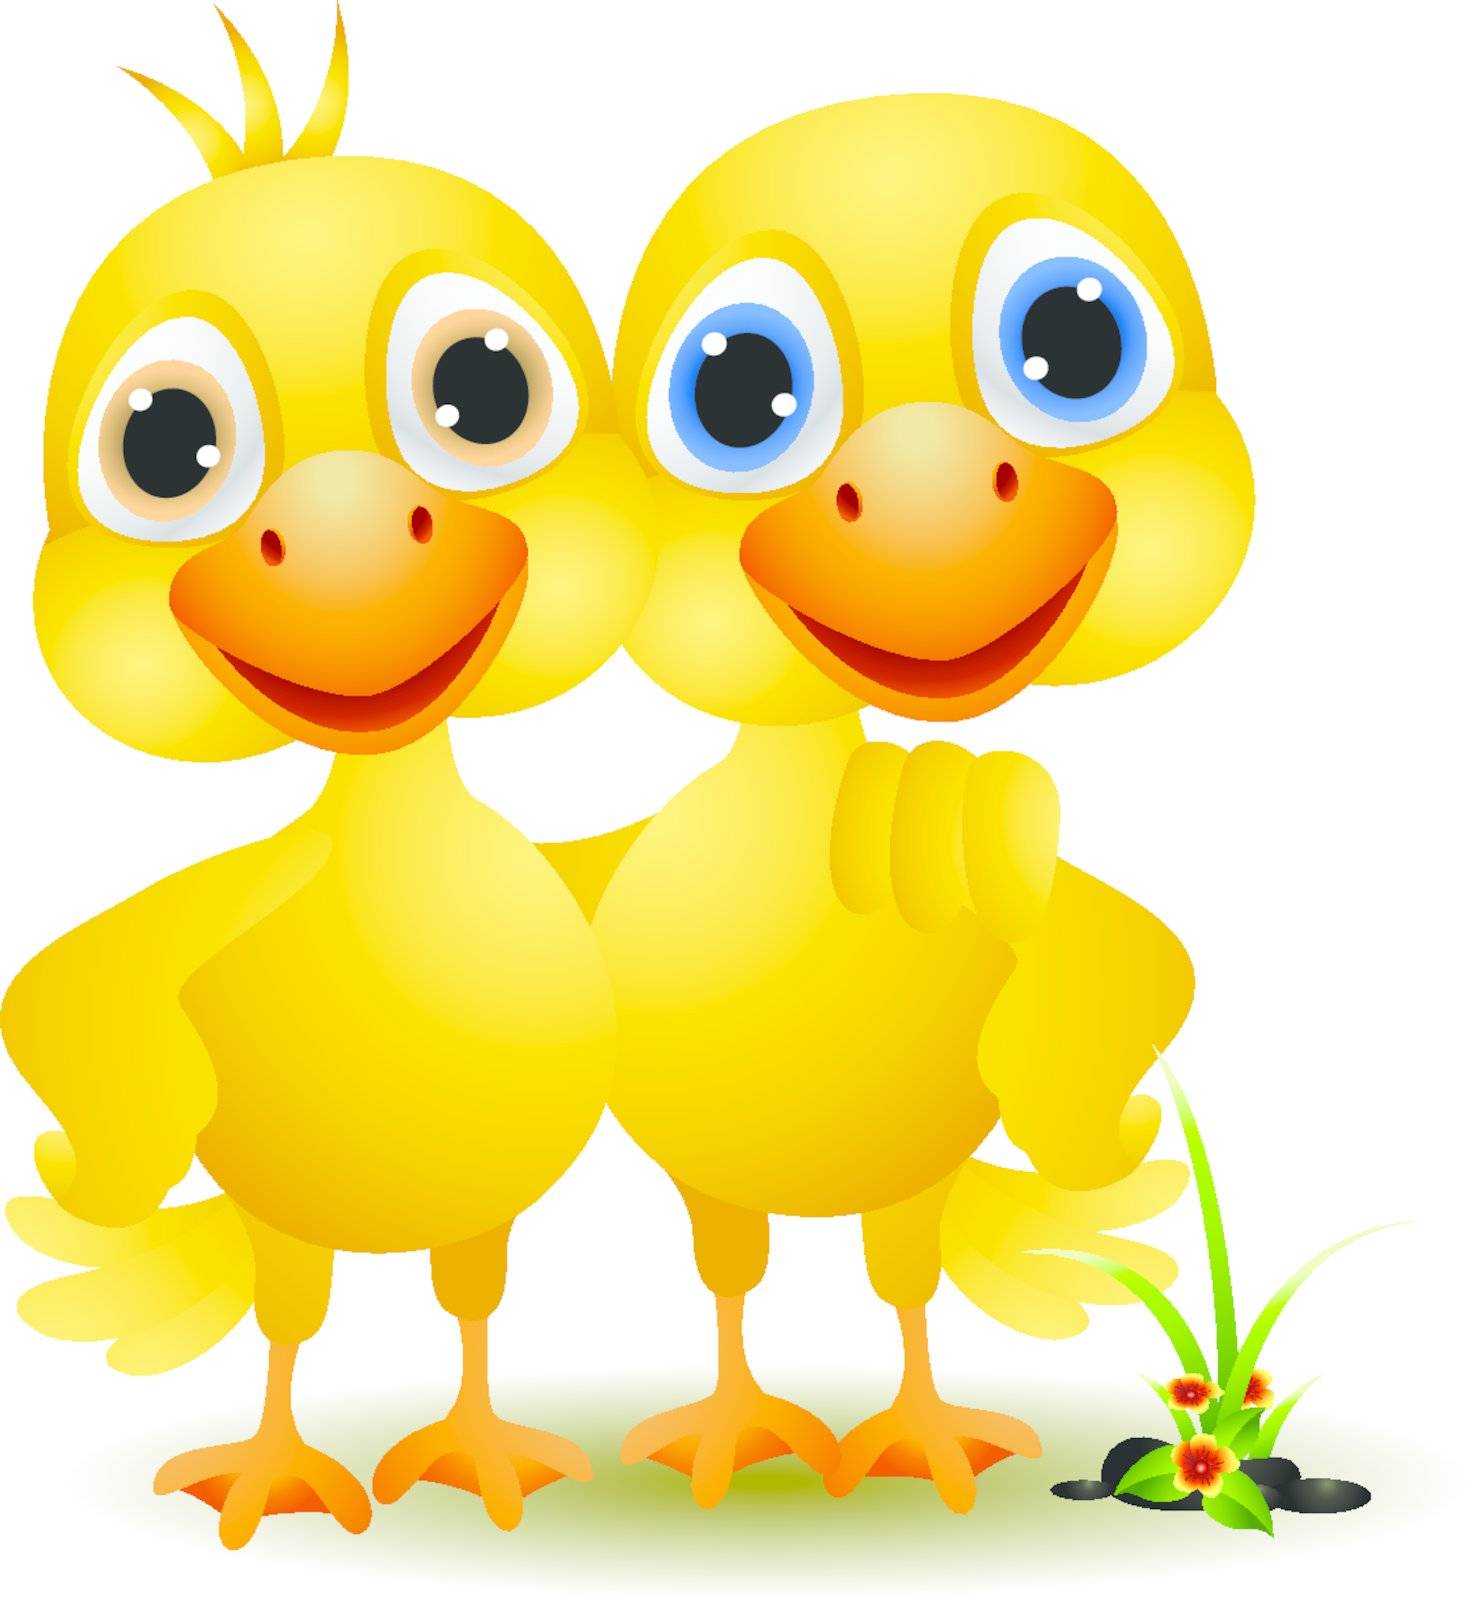 vector illustration of a pair of ducks in a friendly